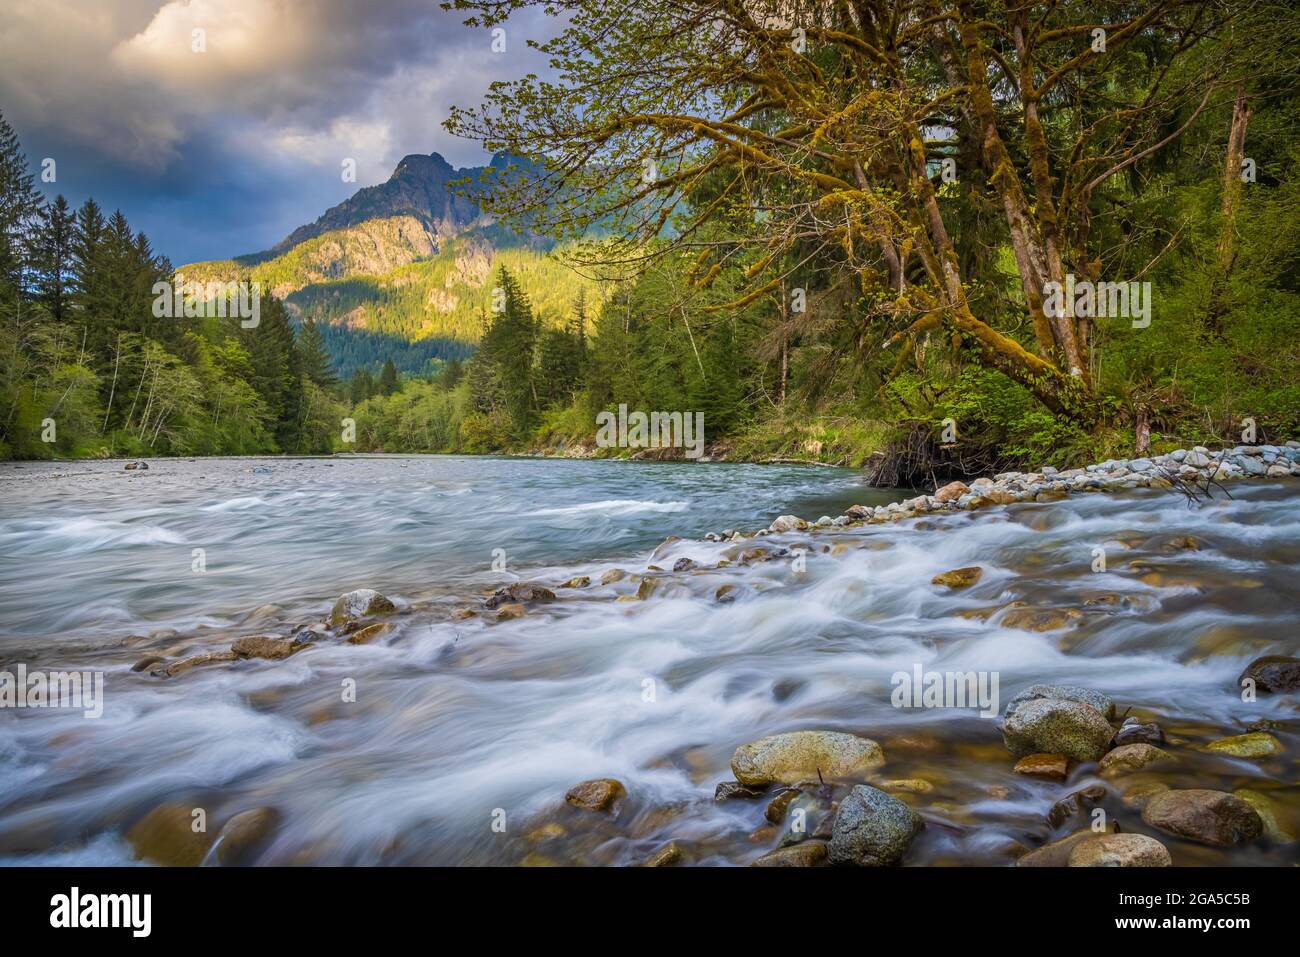 Middle Fork Snoqualmie River NRCA in Washington state. Stock Photo